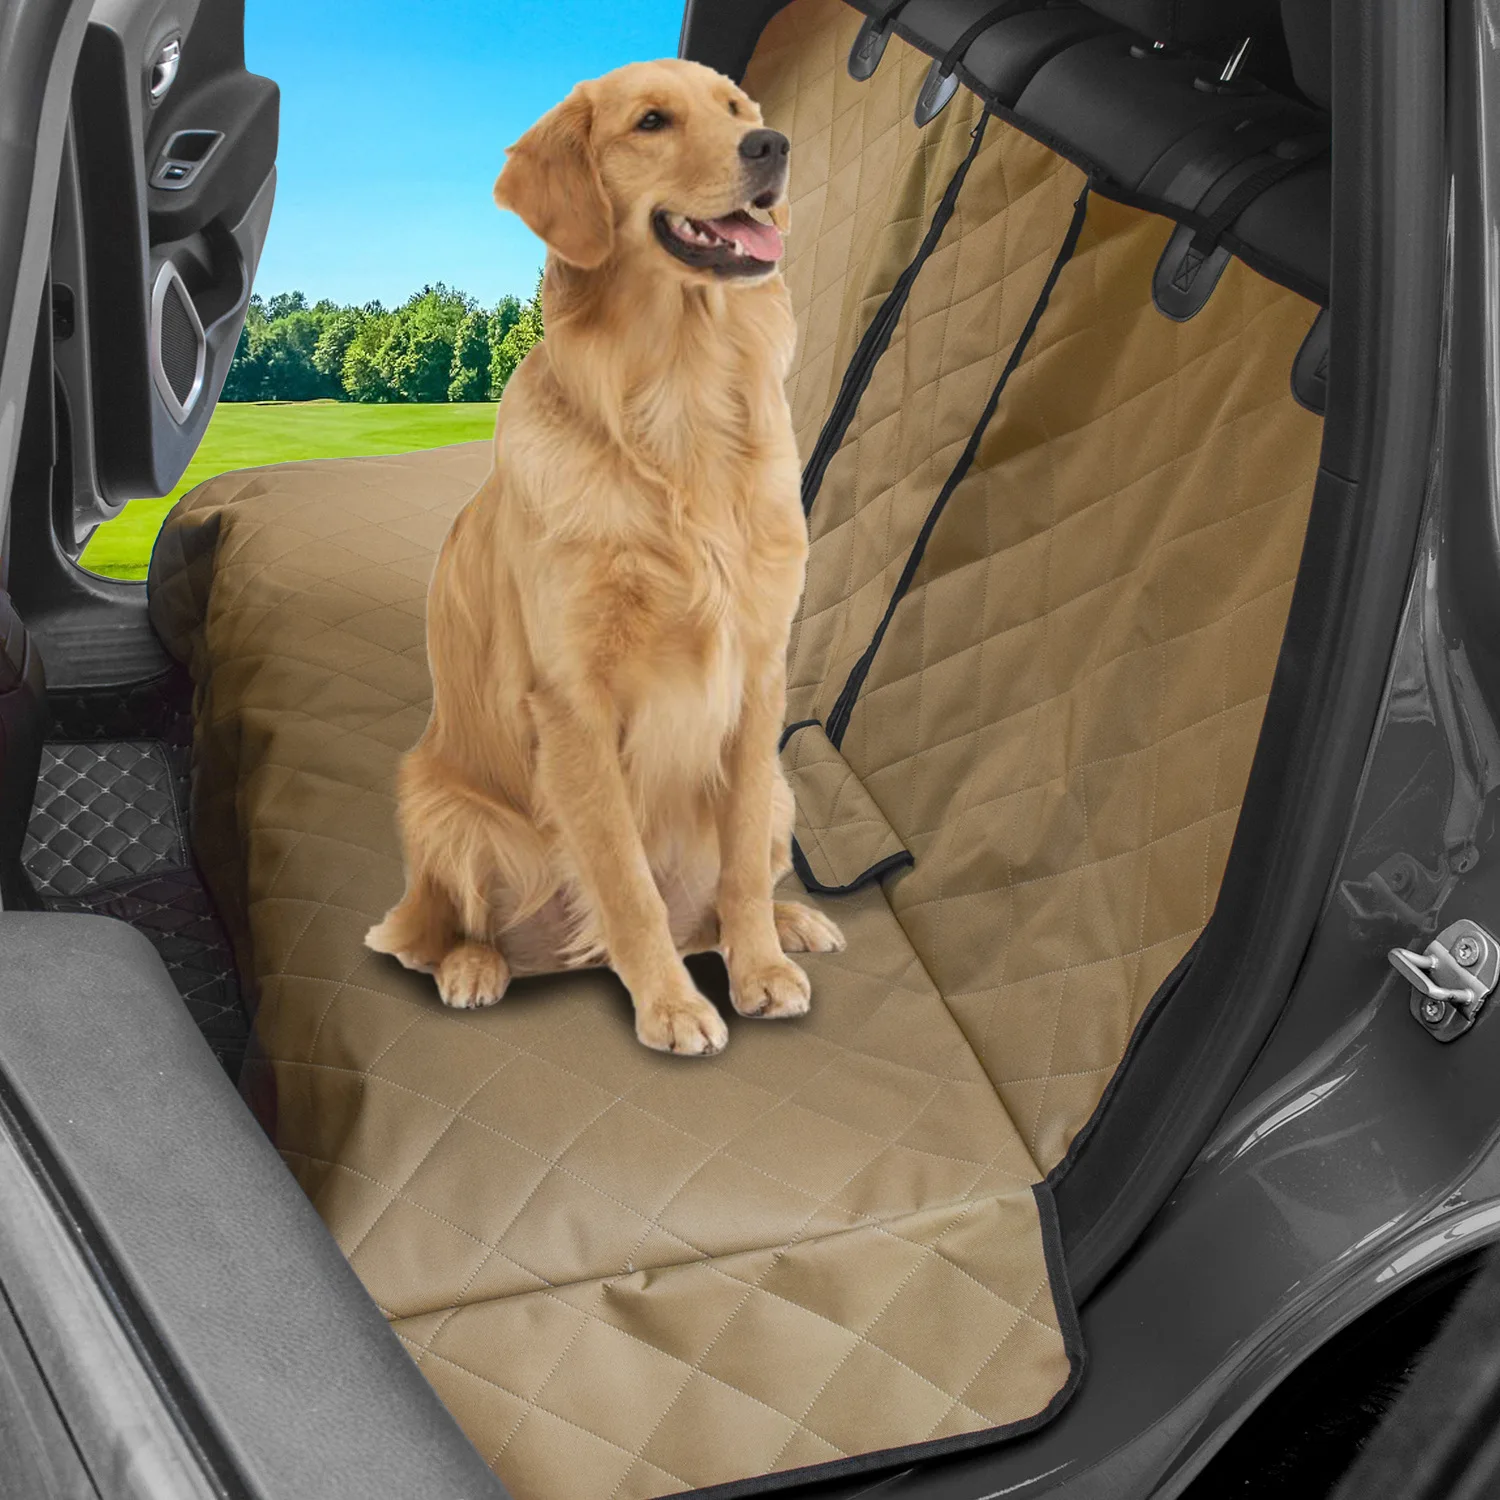 

Dog Car Seat Cover 100% Waterproof Car Back Seat Protector Nonslip & Washable Pet Seat Cover for Cars Trucks SUVs, Khaki